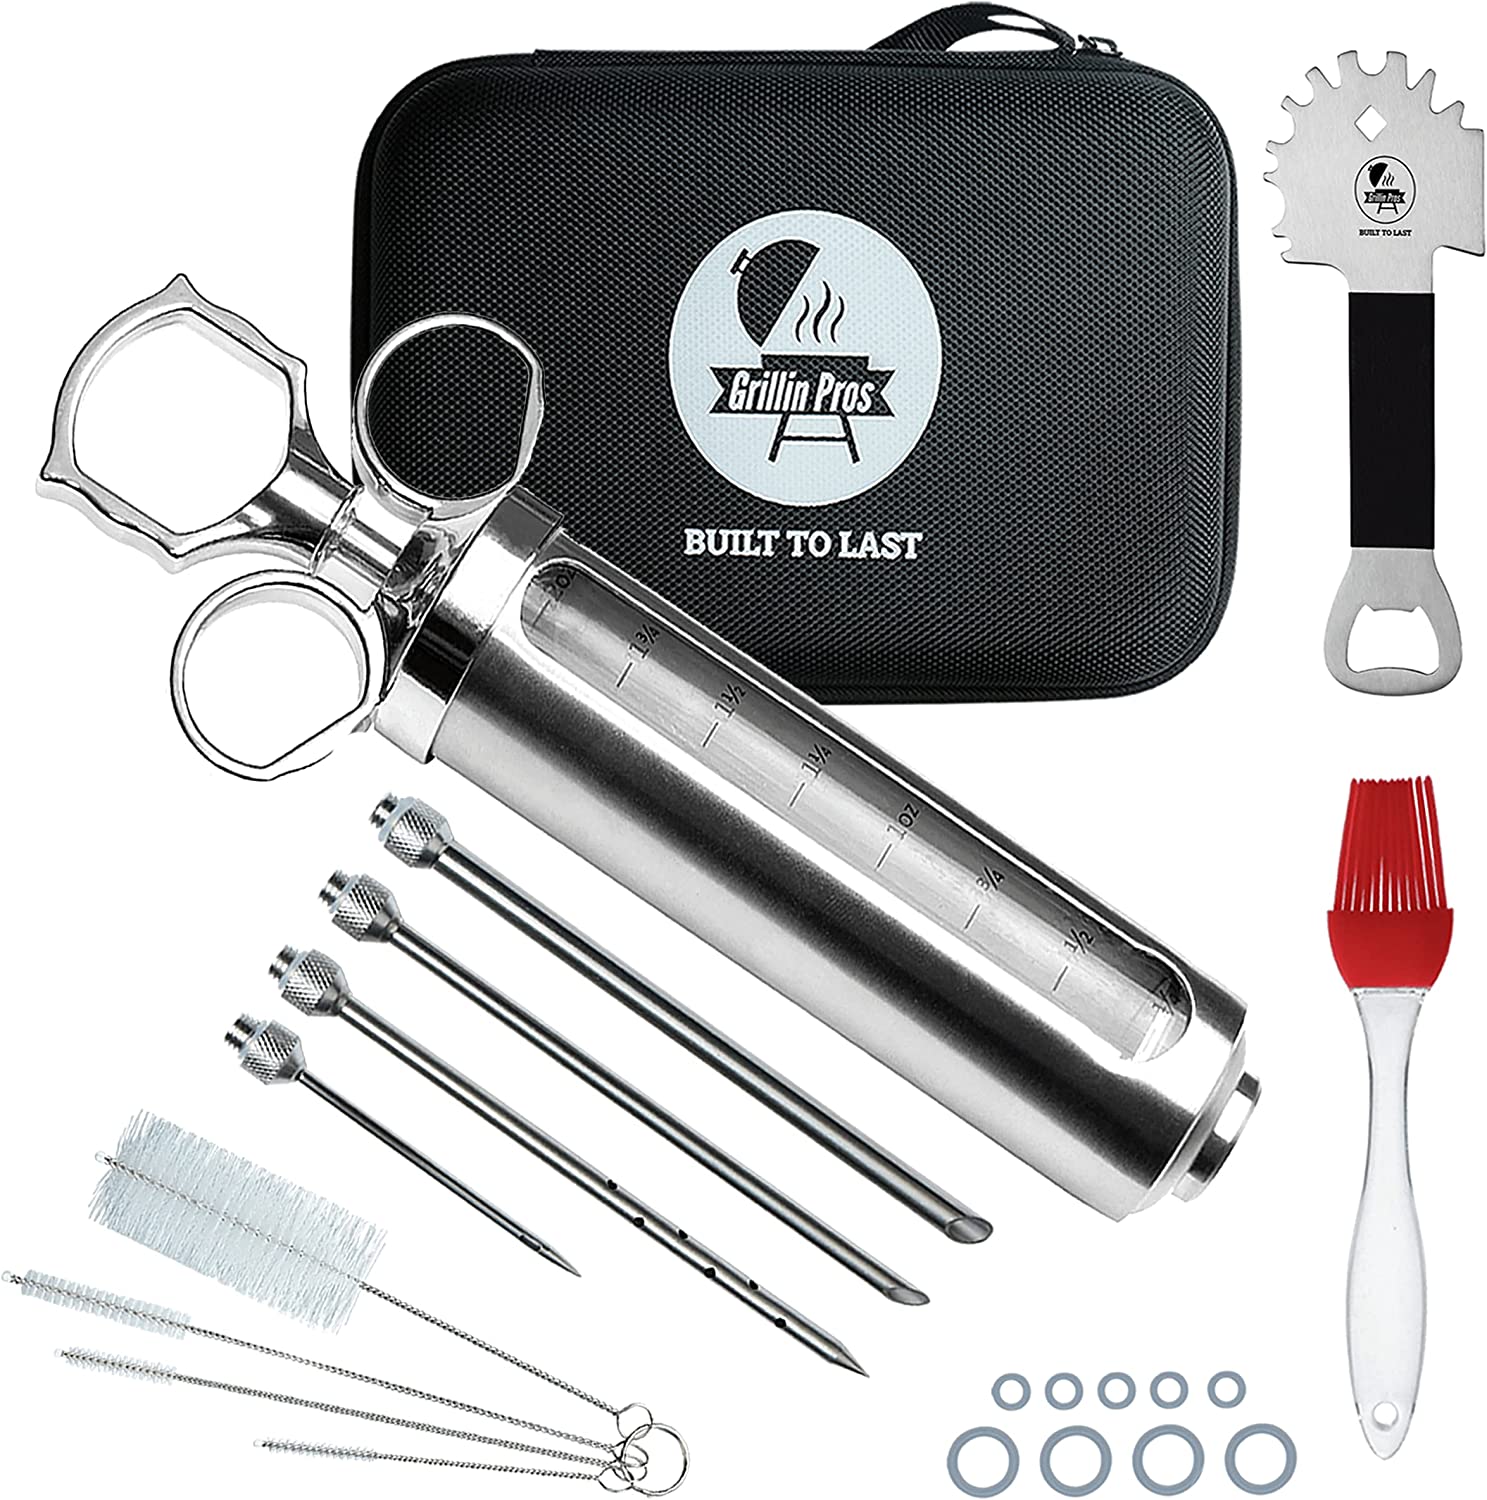 11 Piece Load-N-Go Meat Injector Kit – Grill Team Six